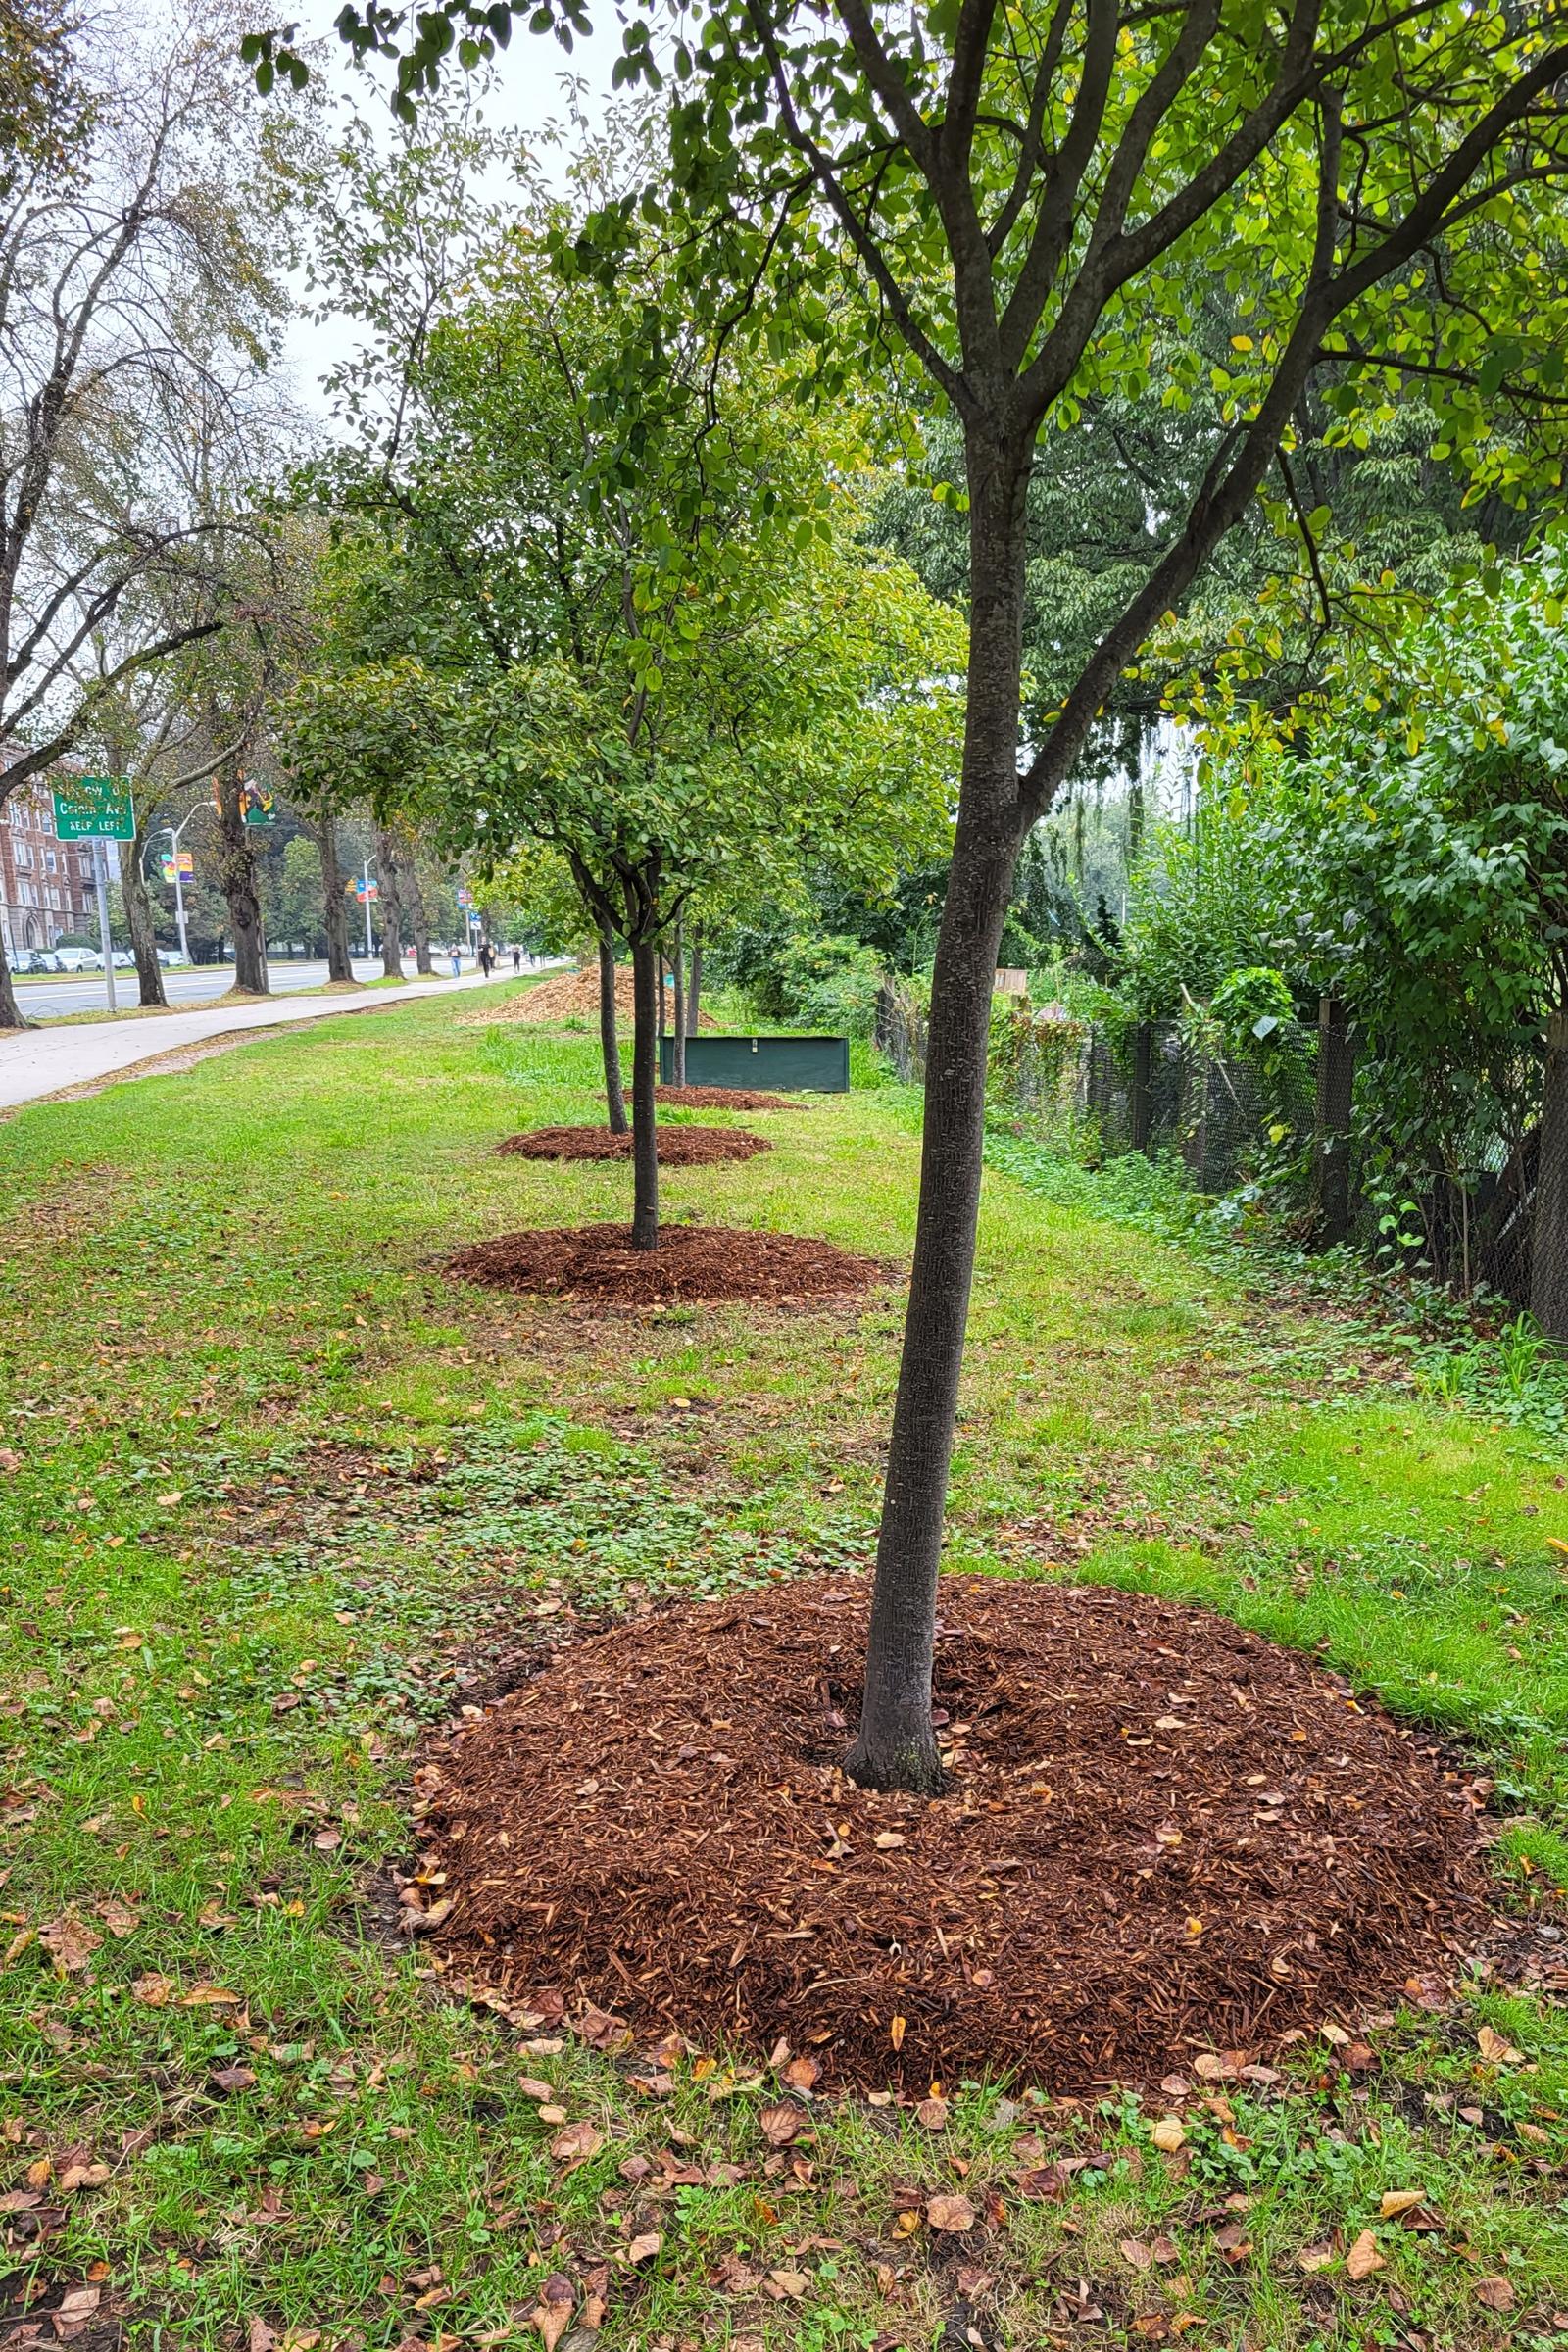 A line of trees extends backward in the middle of the frame. All trees have excellent examples of correct mulching. The grass and leaves are bright green.